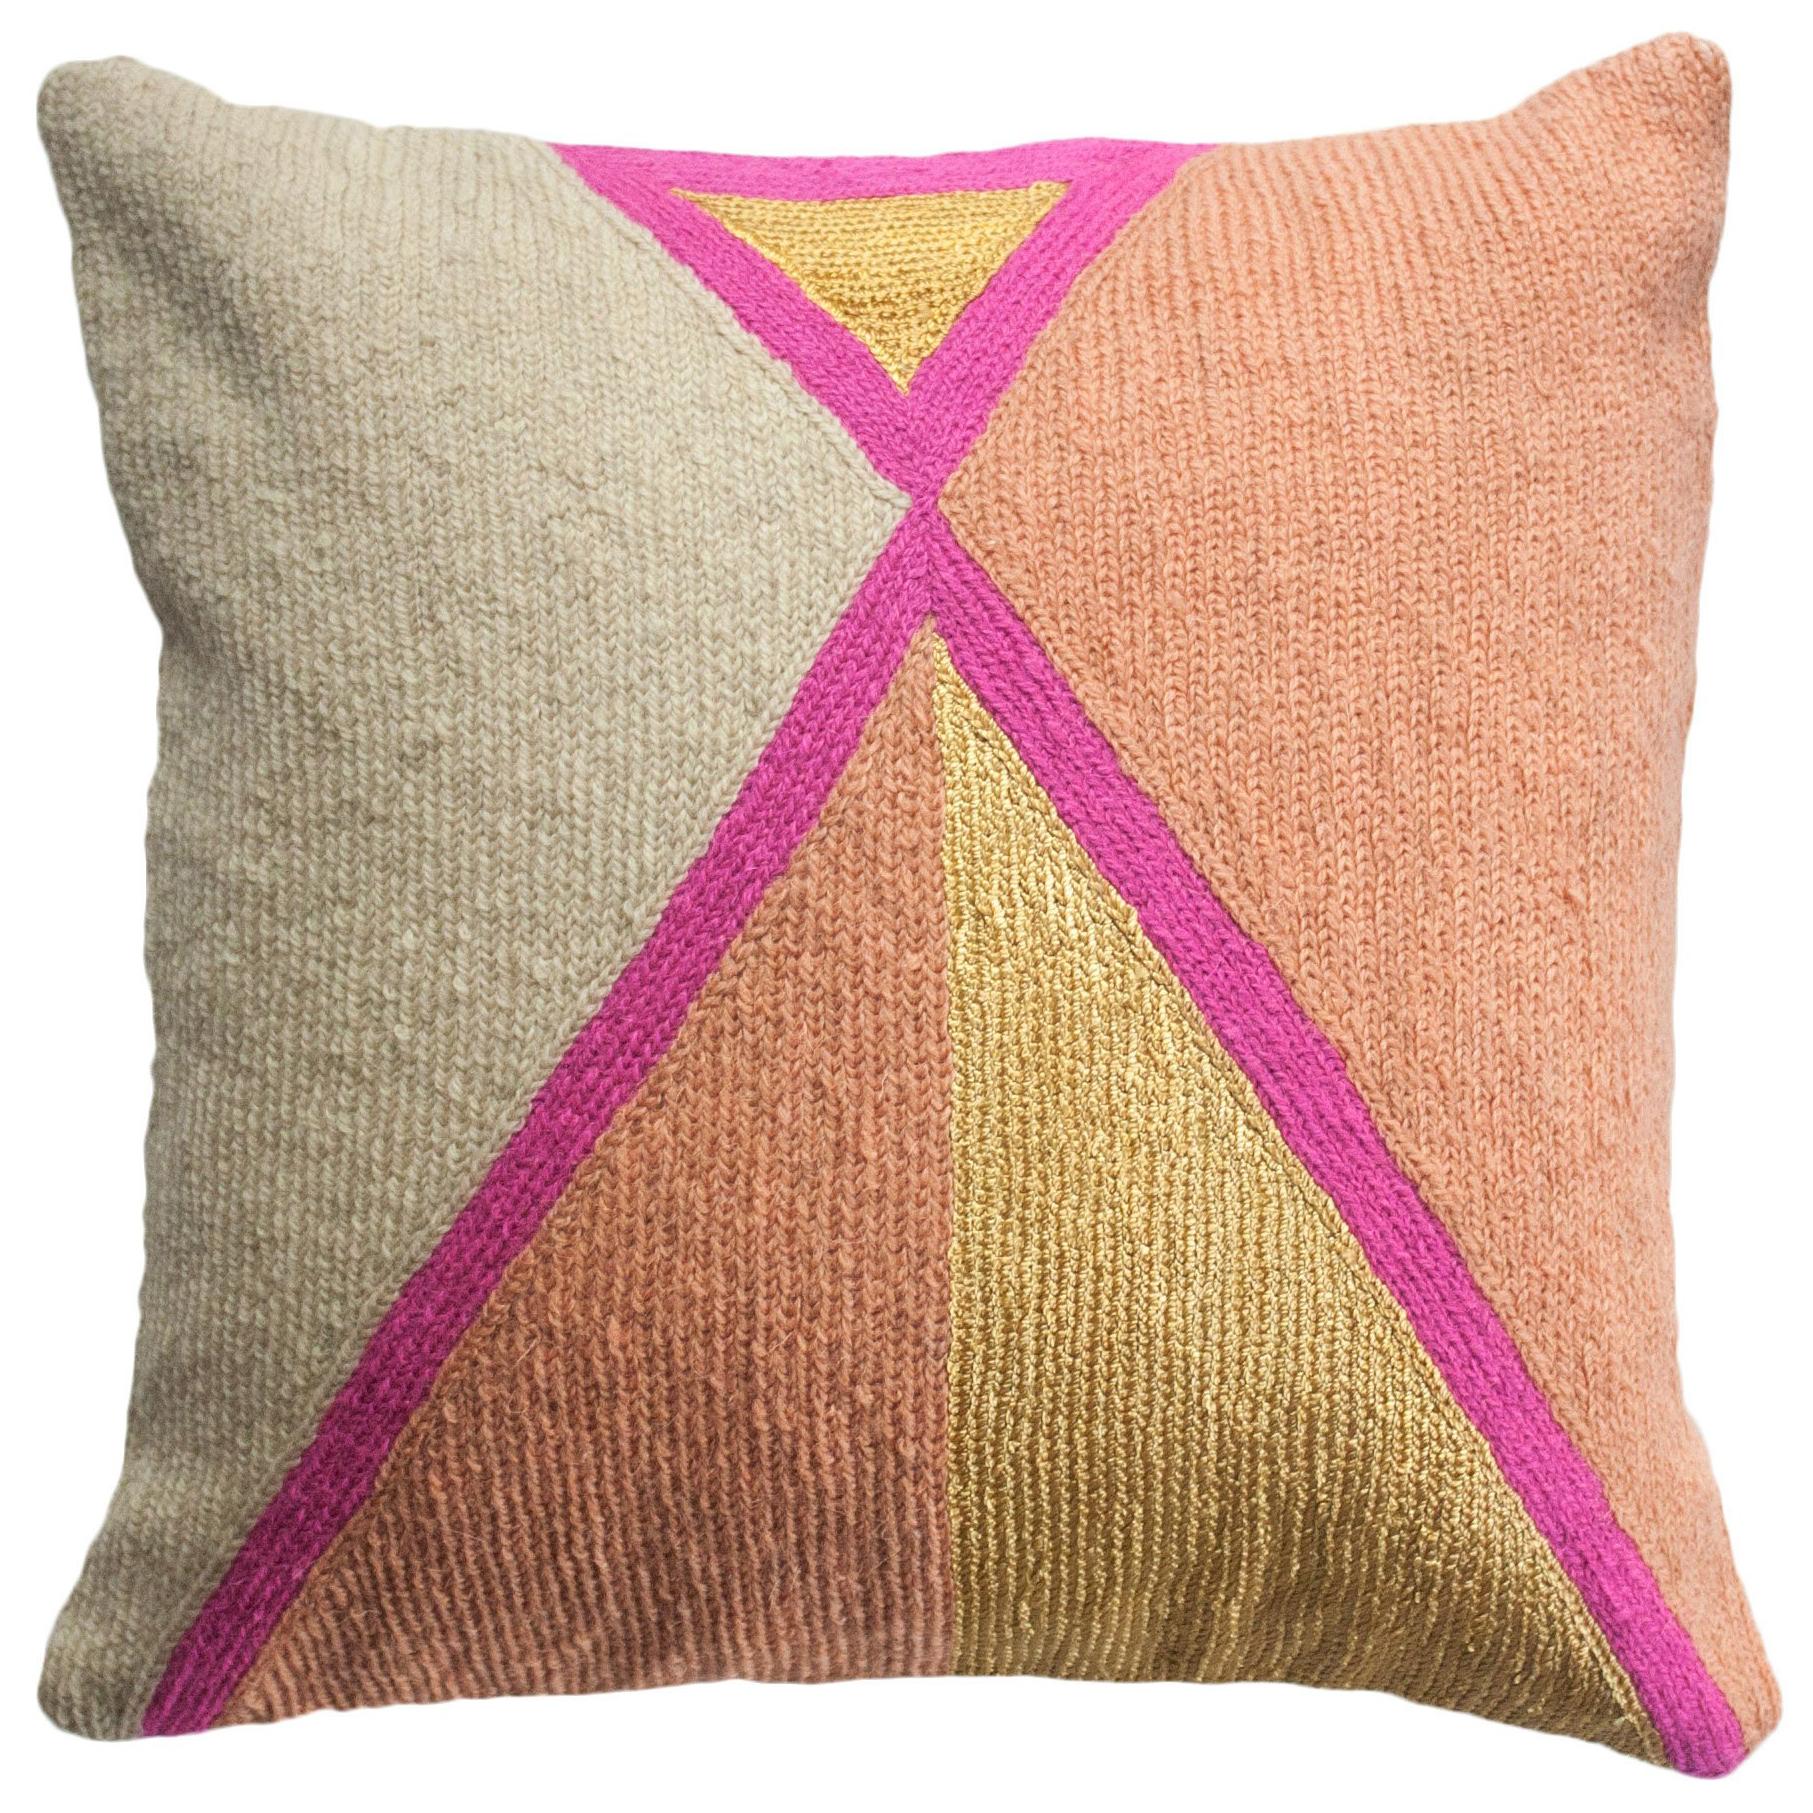 Nia Triangle Hand Embroidered Modern Geometric Throw Pillow Cover